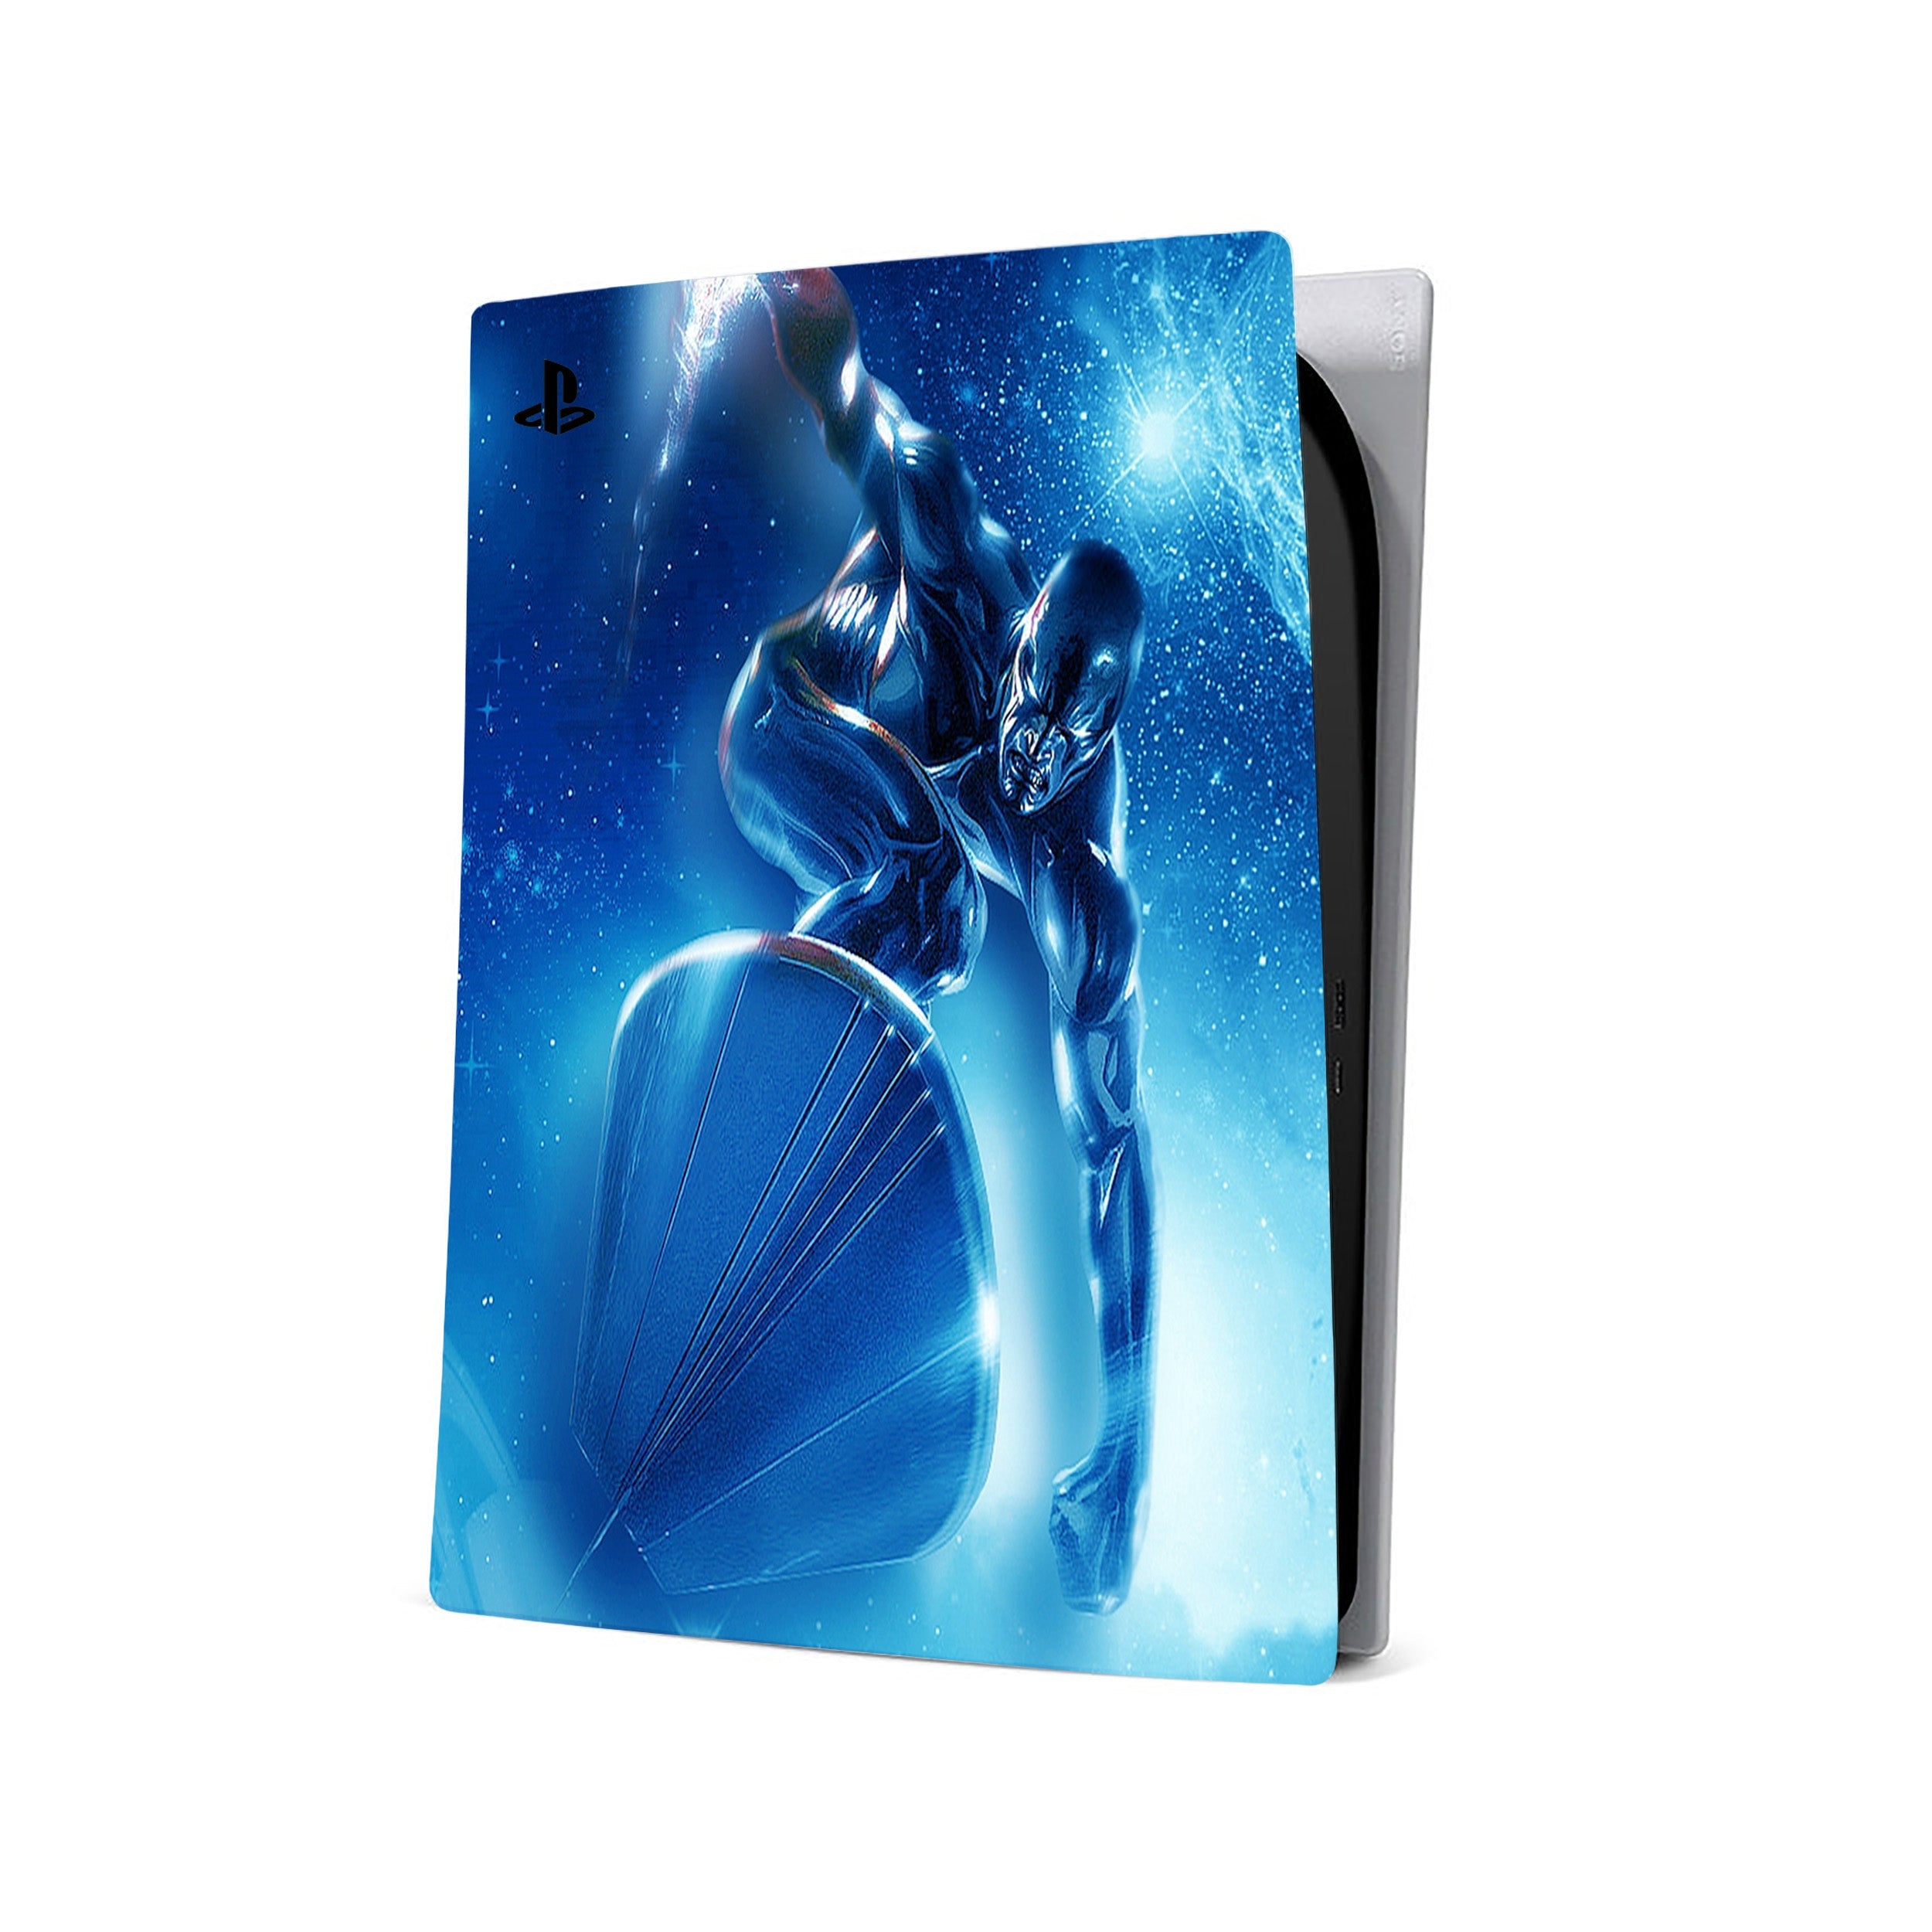 A video game skin featuring a Marvel Comics Silver Surfer design for the PS5.